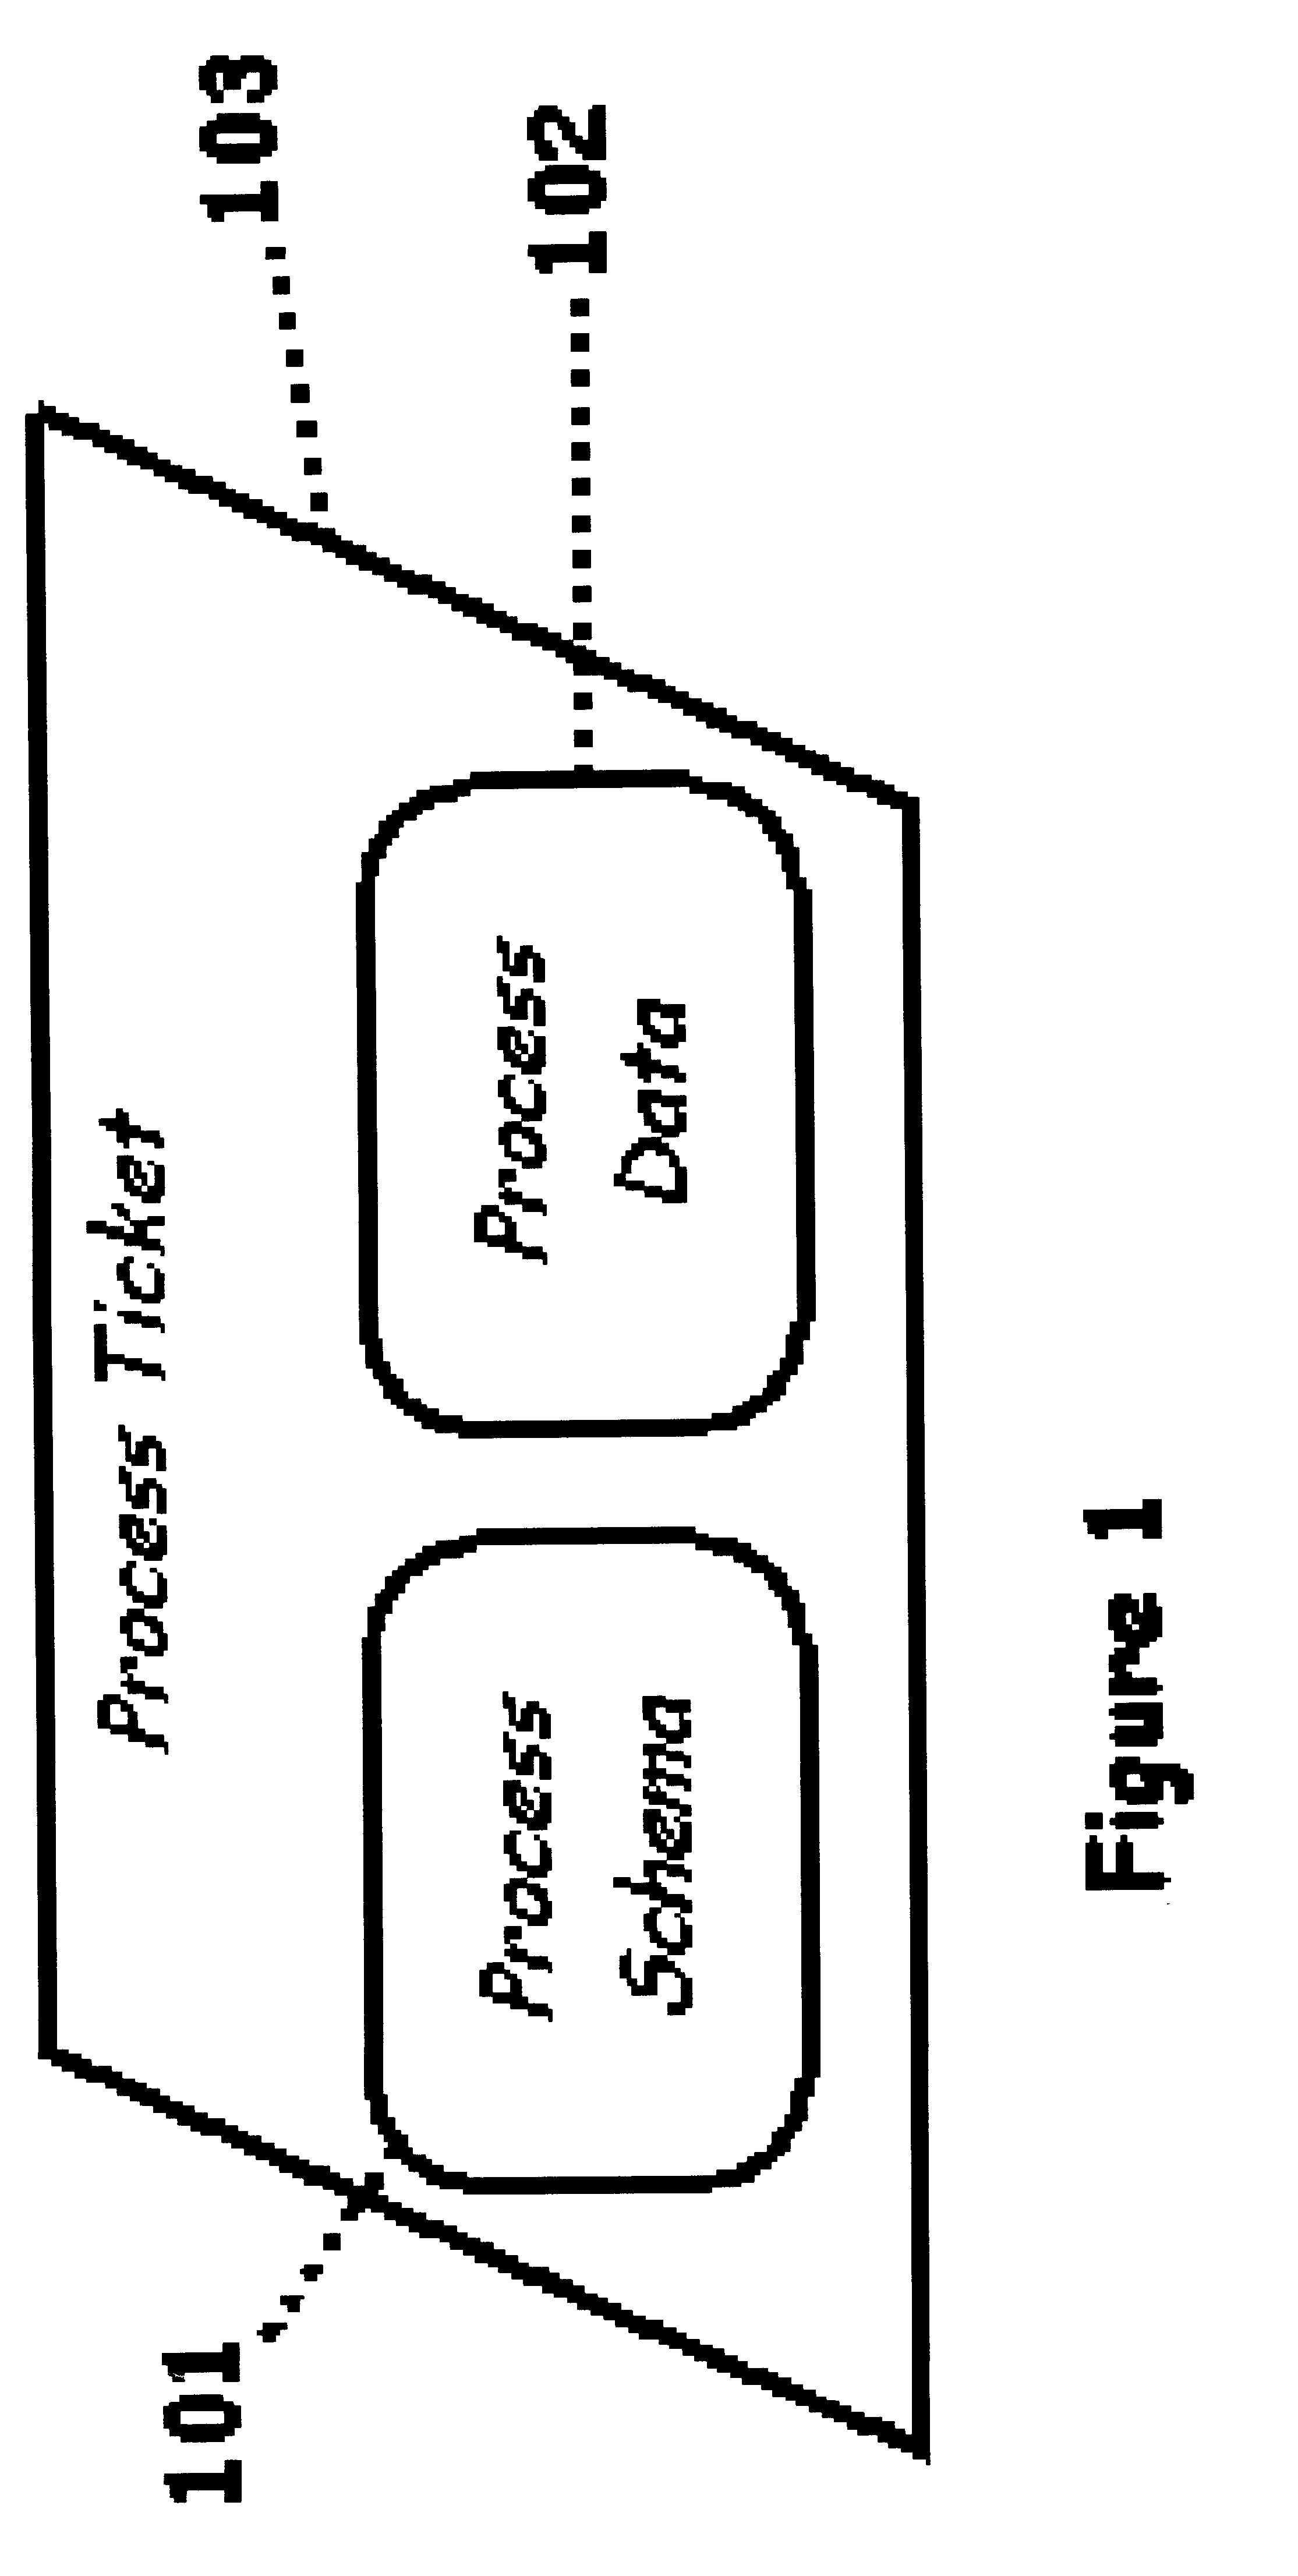 Distributed Dynamic Process Control System